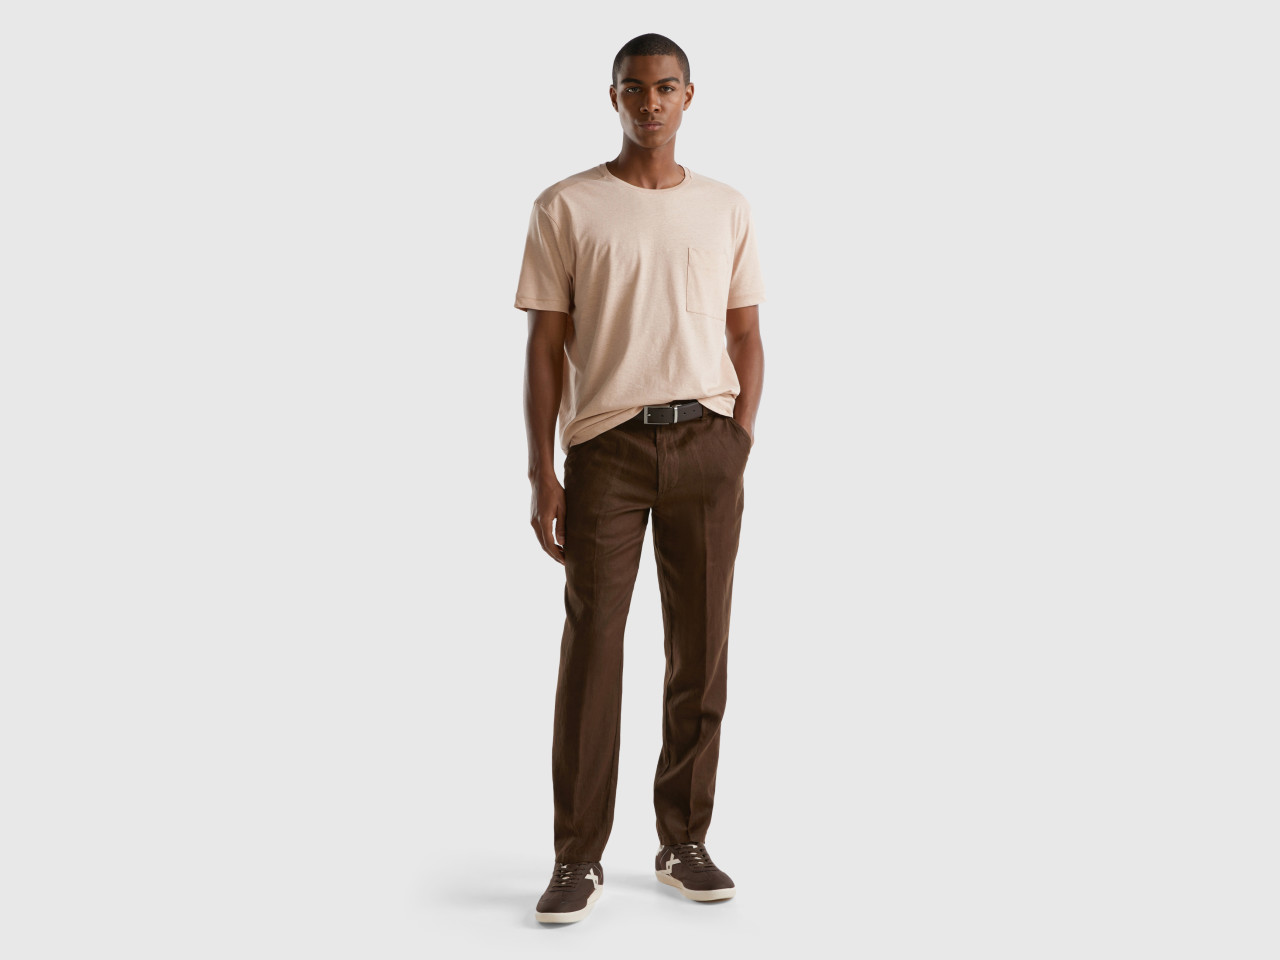 Our style tips for matching the colour of your chino - THE NINES